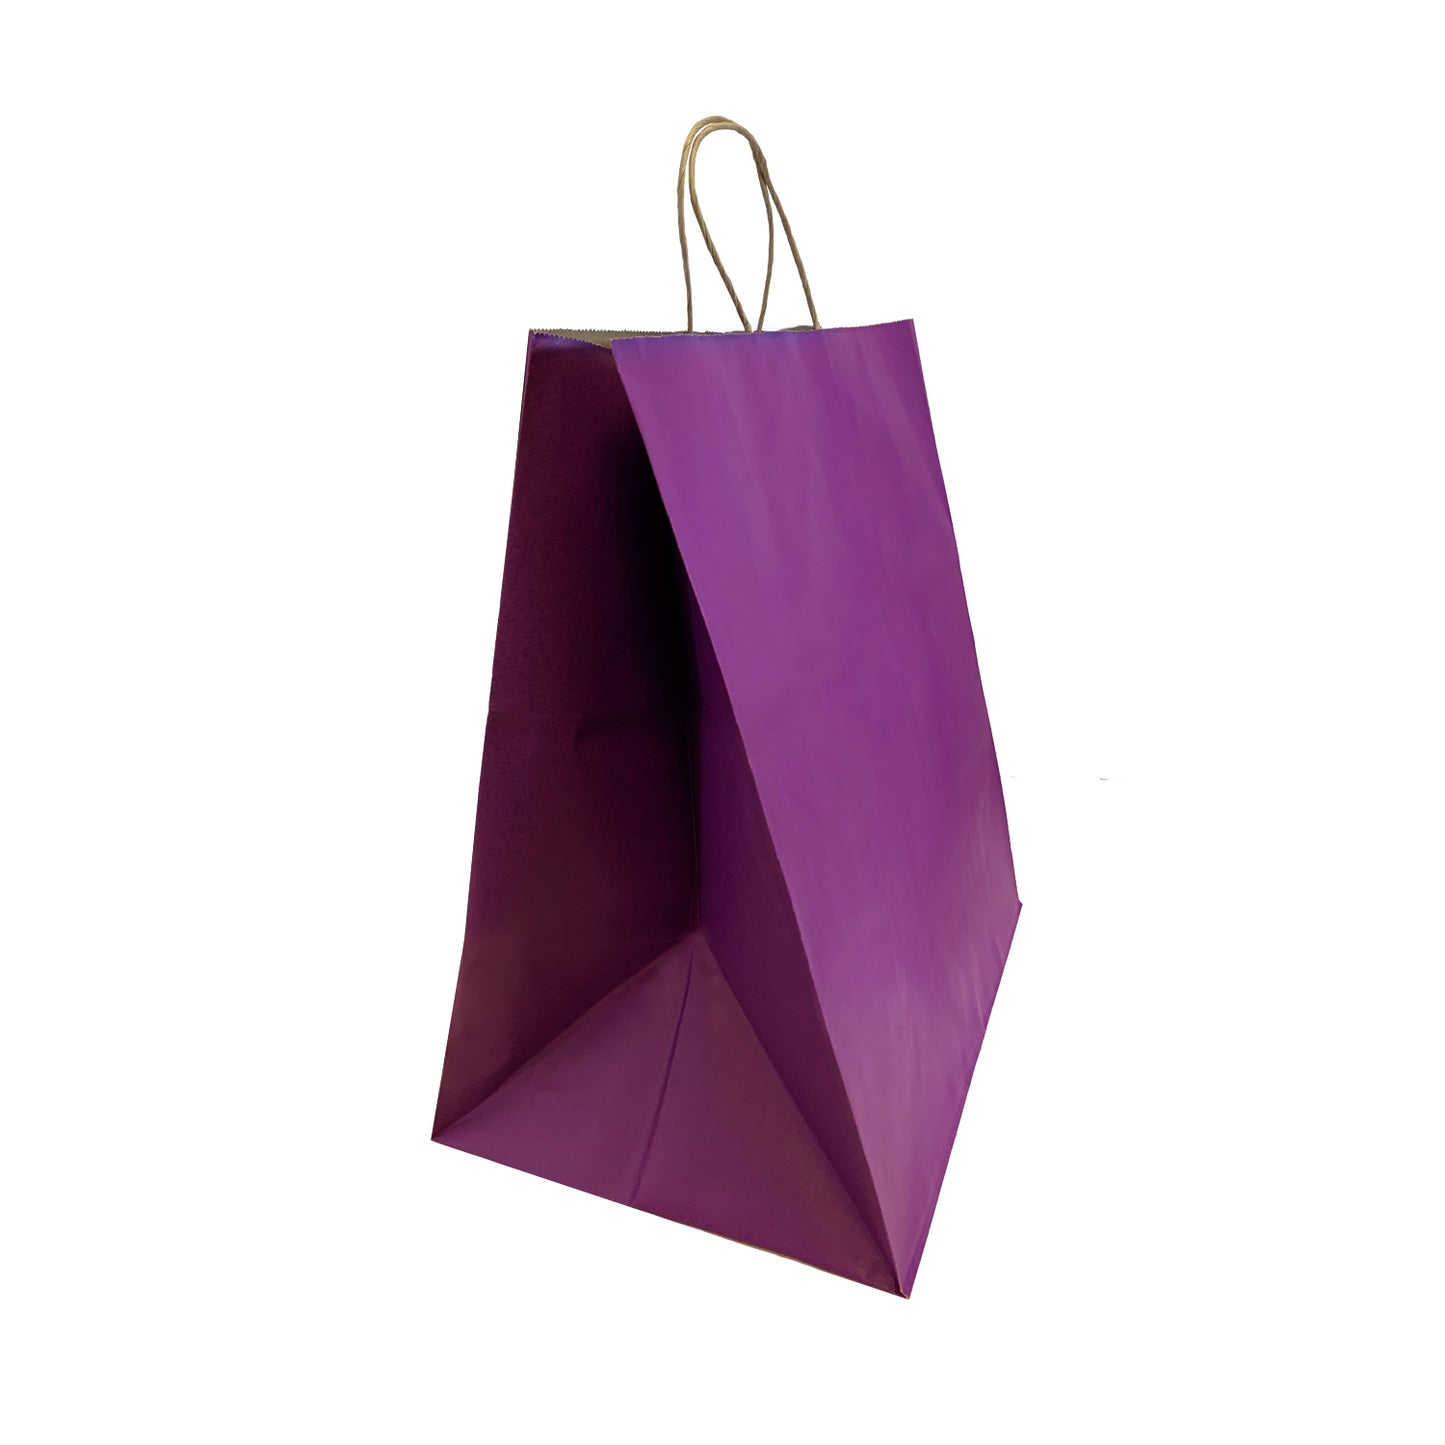 150 Pcs, Super Royal,  14x10x15.75 inches, Purple Kraft Paper Bags, with Twisted handle